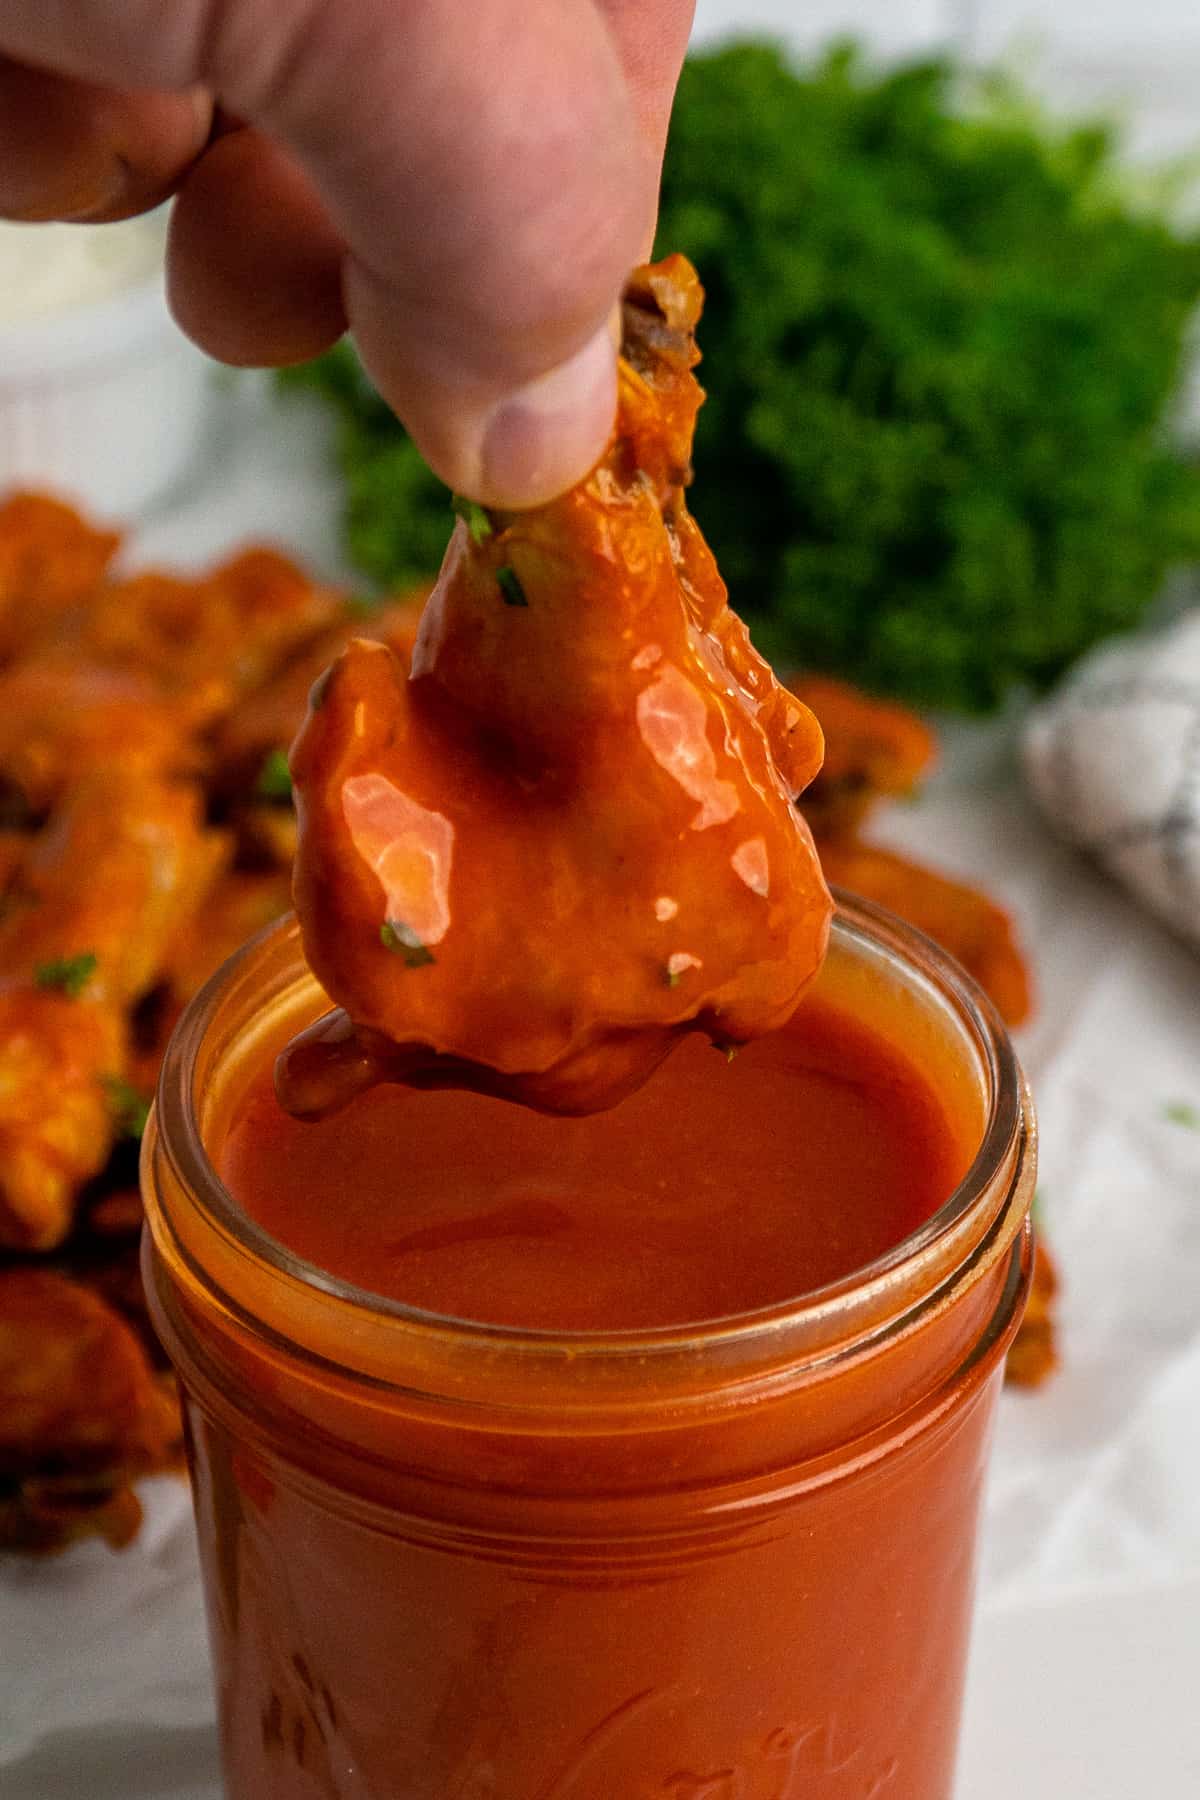 A chicken wing being dipped into buffalo sauce.